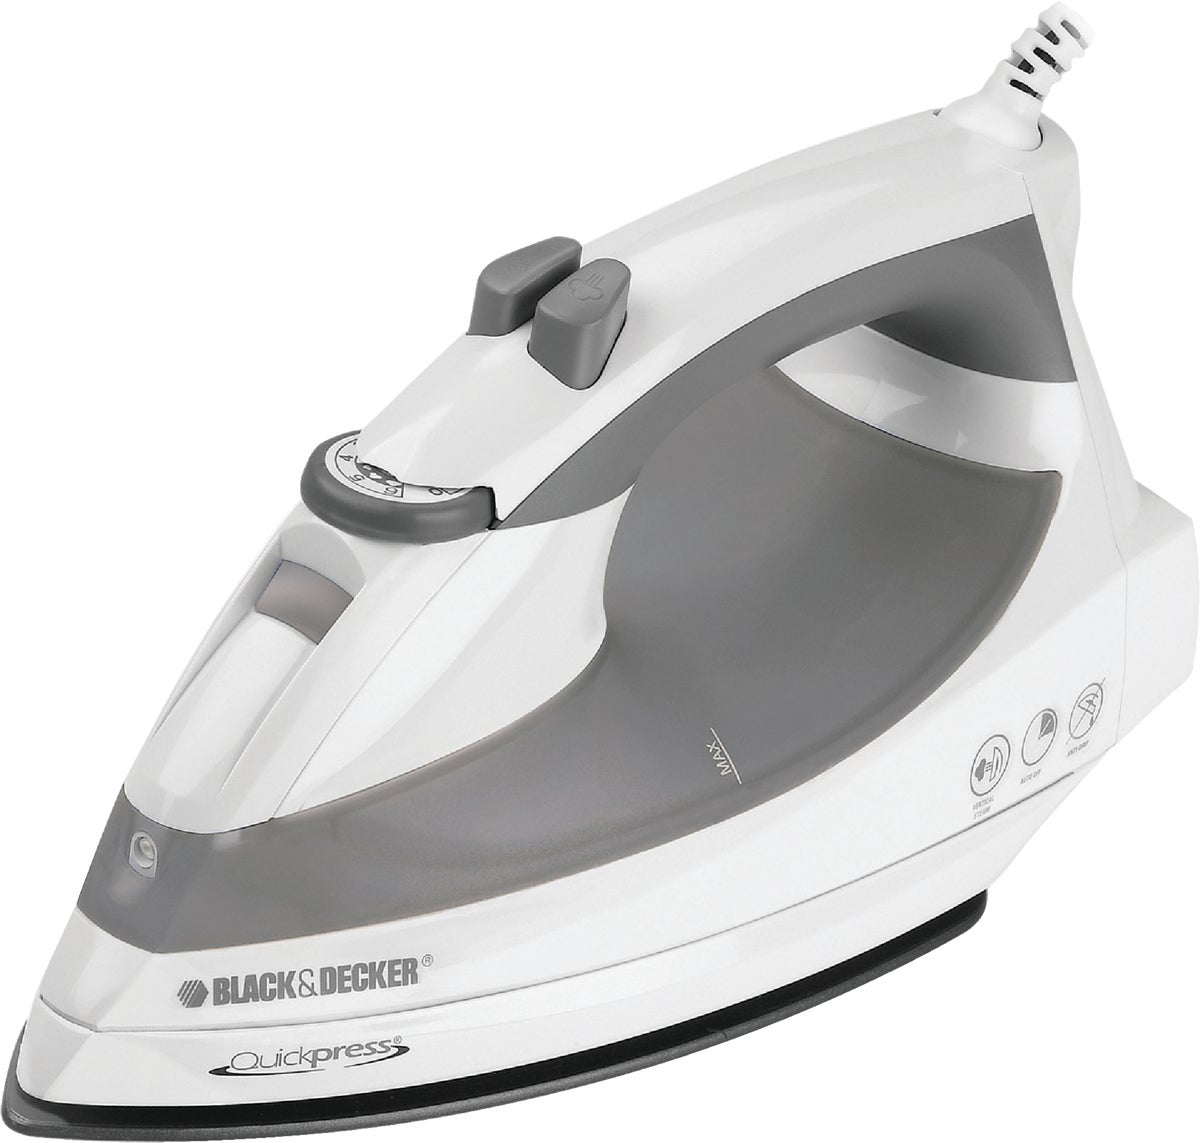 NEW Black & Decker One Step Steam Iron with Cord Reel New 